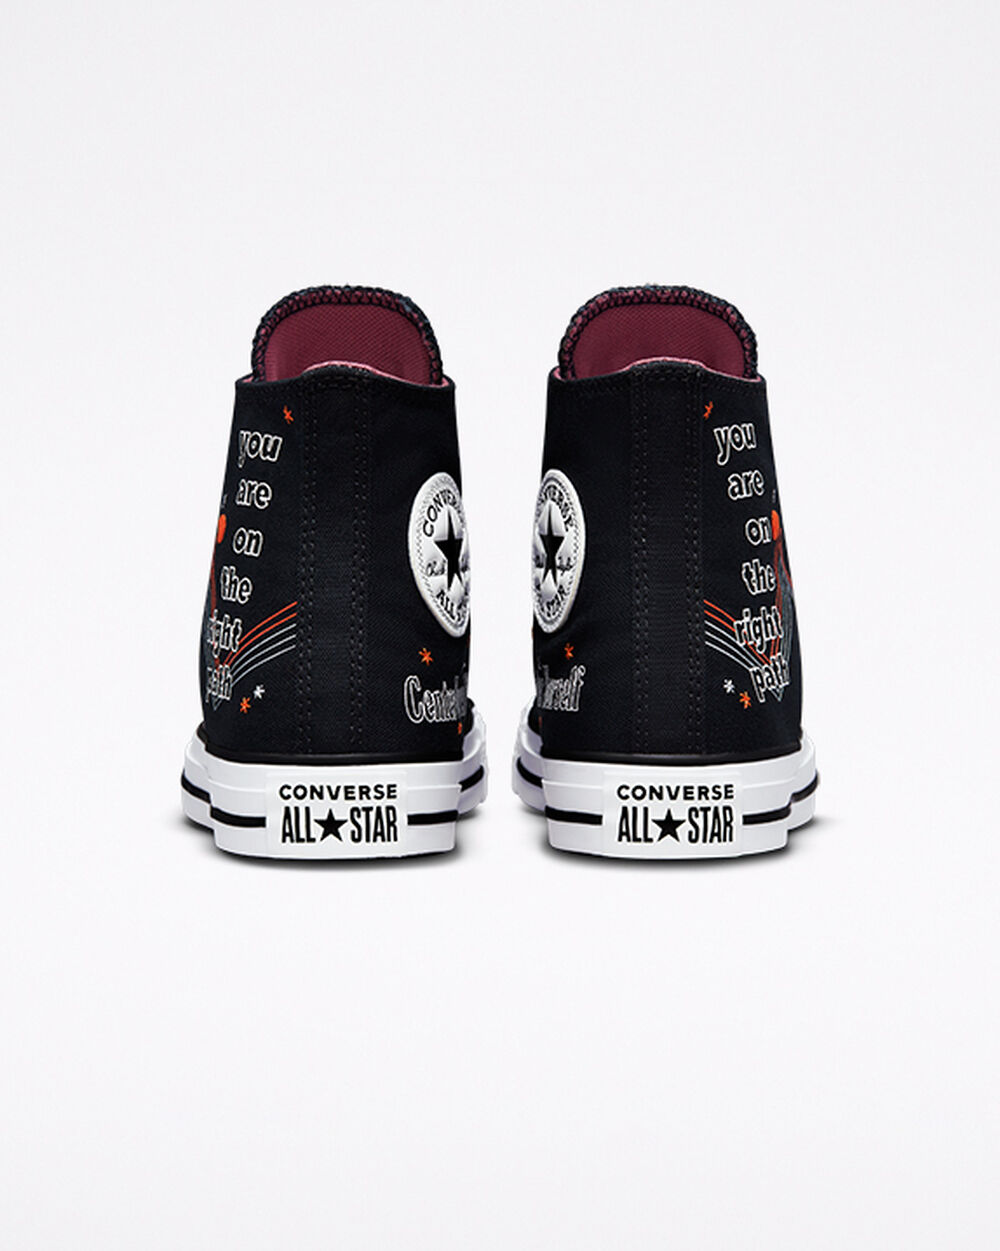 Tenis Converse Chuck Taylor All Star Mujer Negros Blancos Grises | Mexico-418026